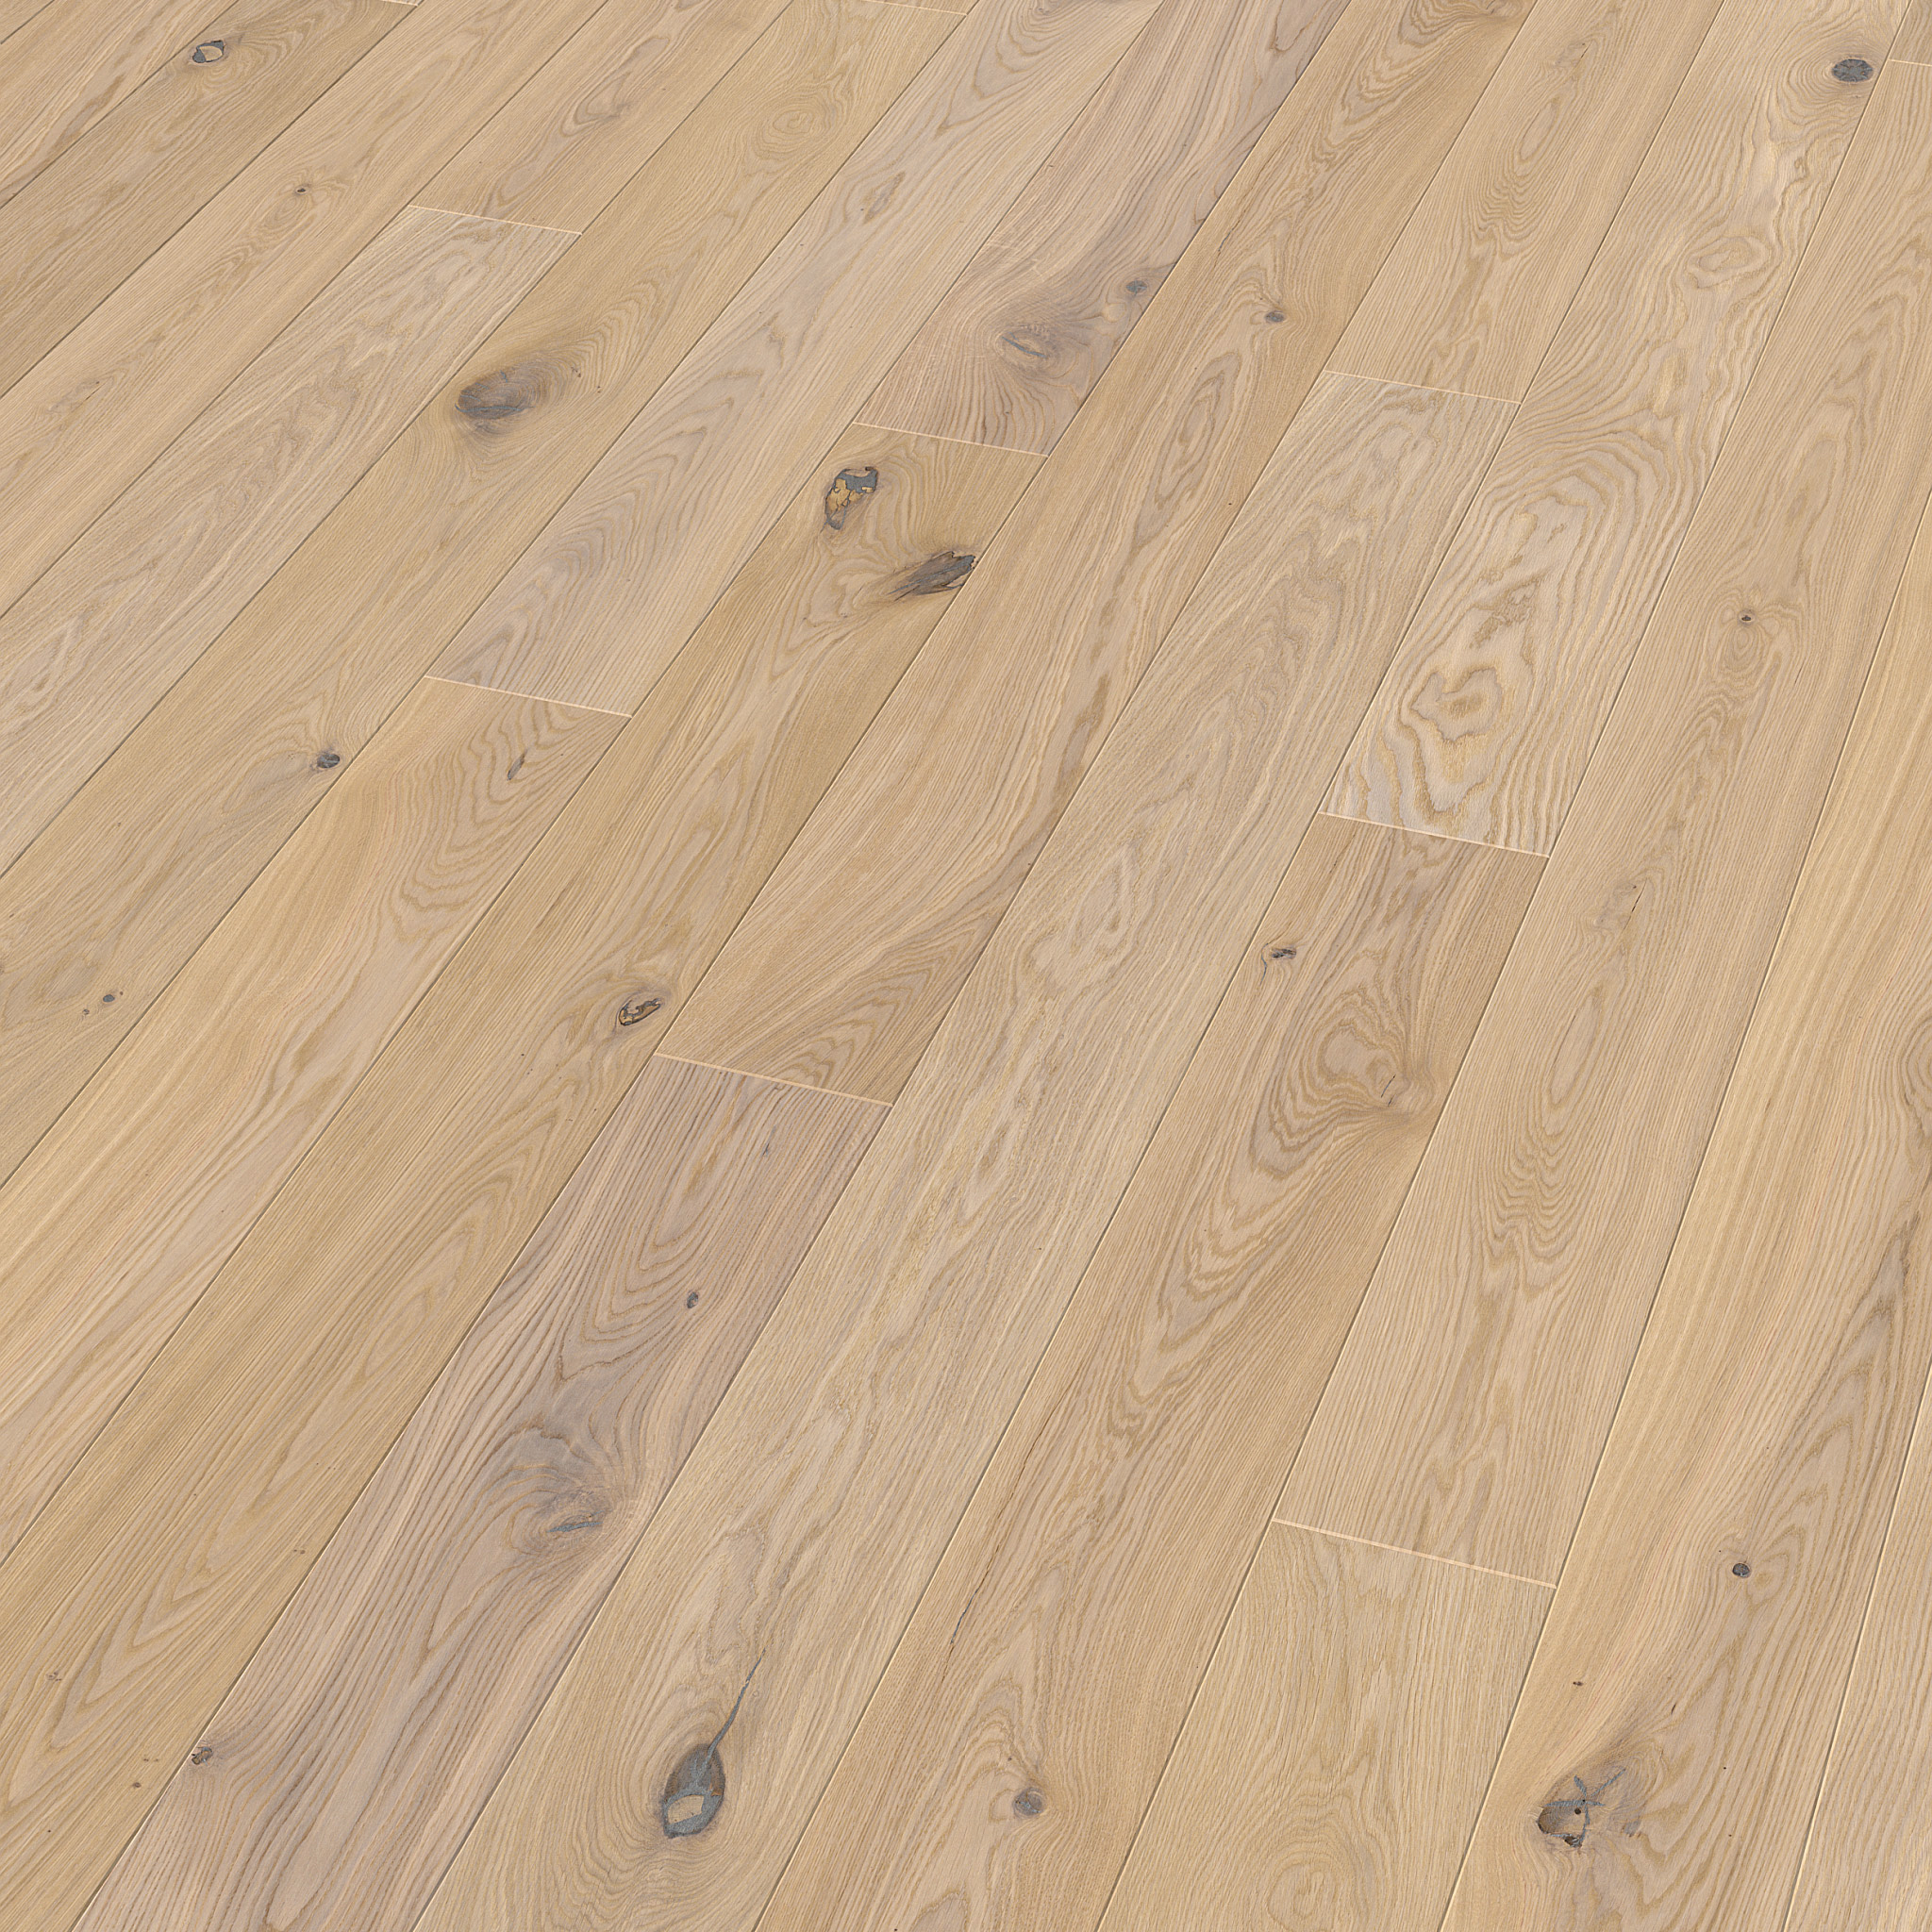 PARAT 190 Oak country extra white oiled